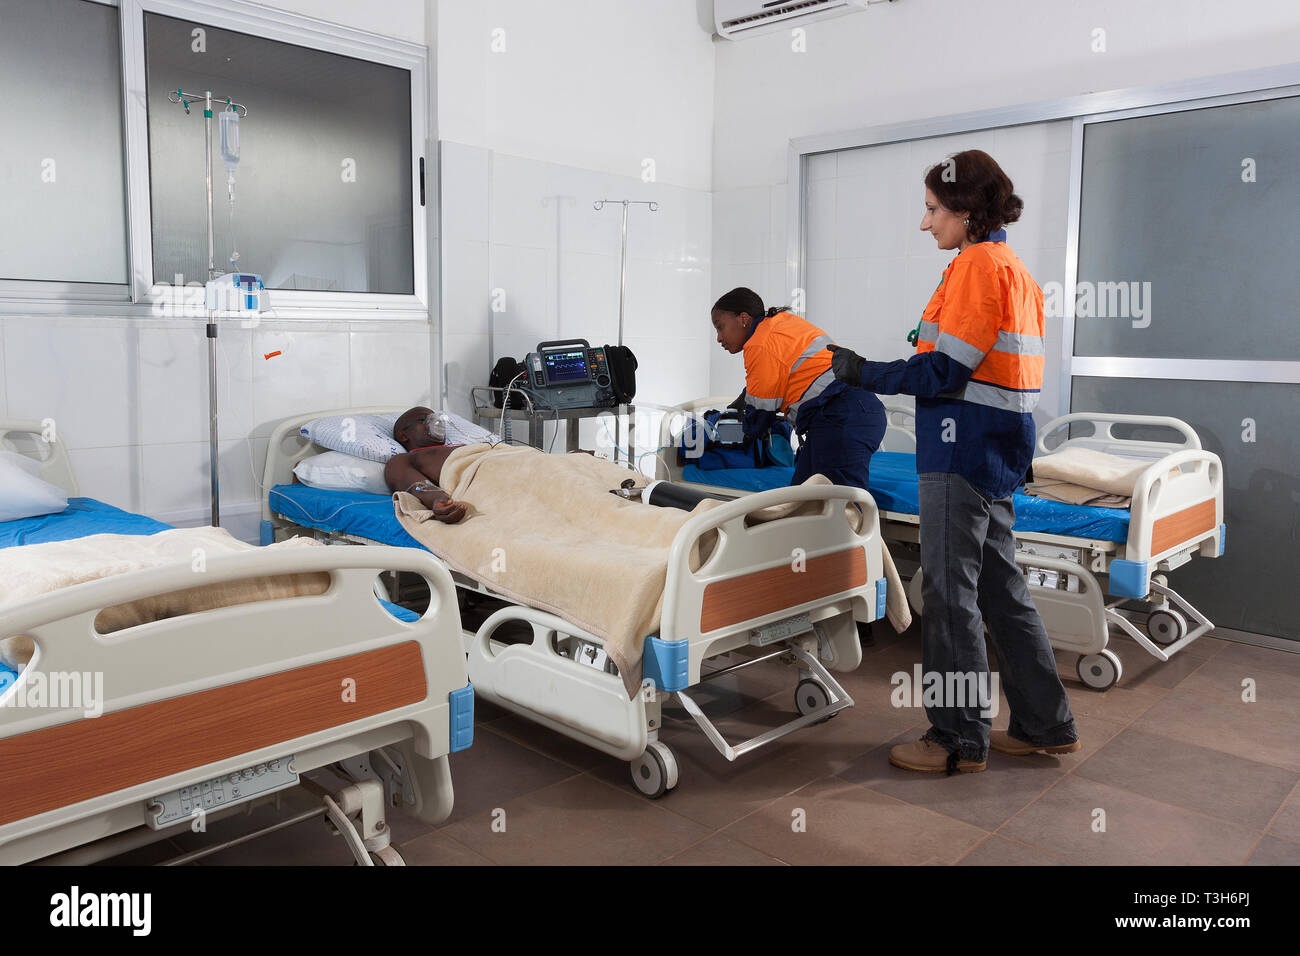 Medical Centre intensive care unit with beds and patient on oxygen showing portable defibrillator and ventilator equipment plus ward doctor and nurse Stock Photo